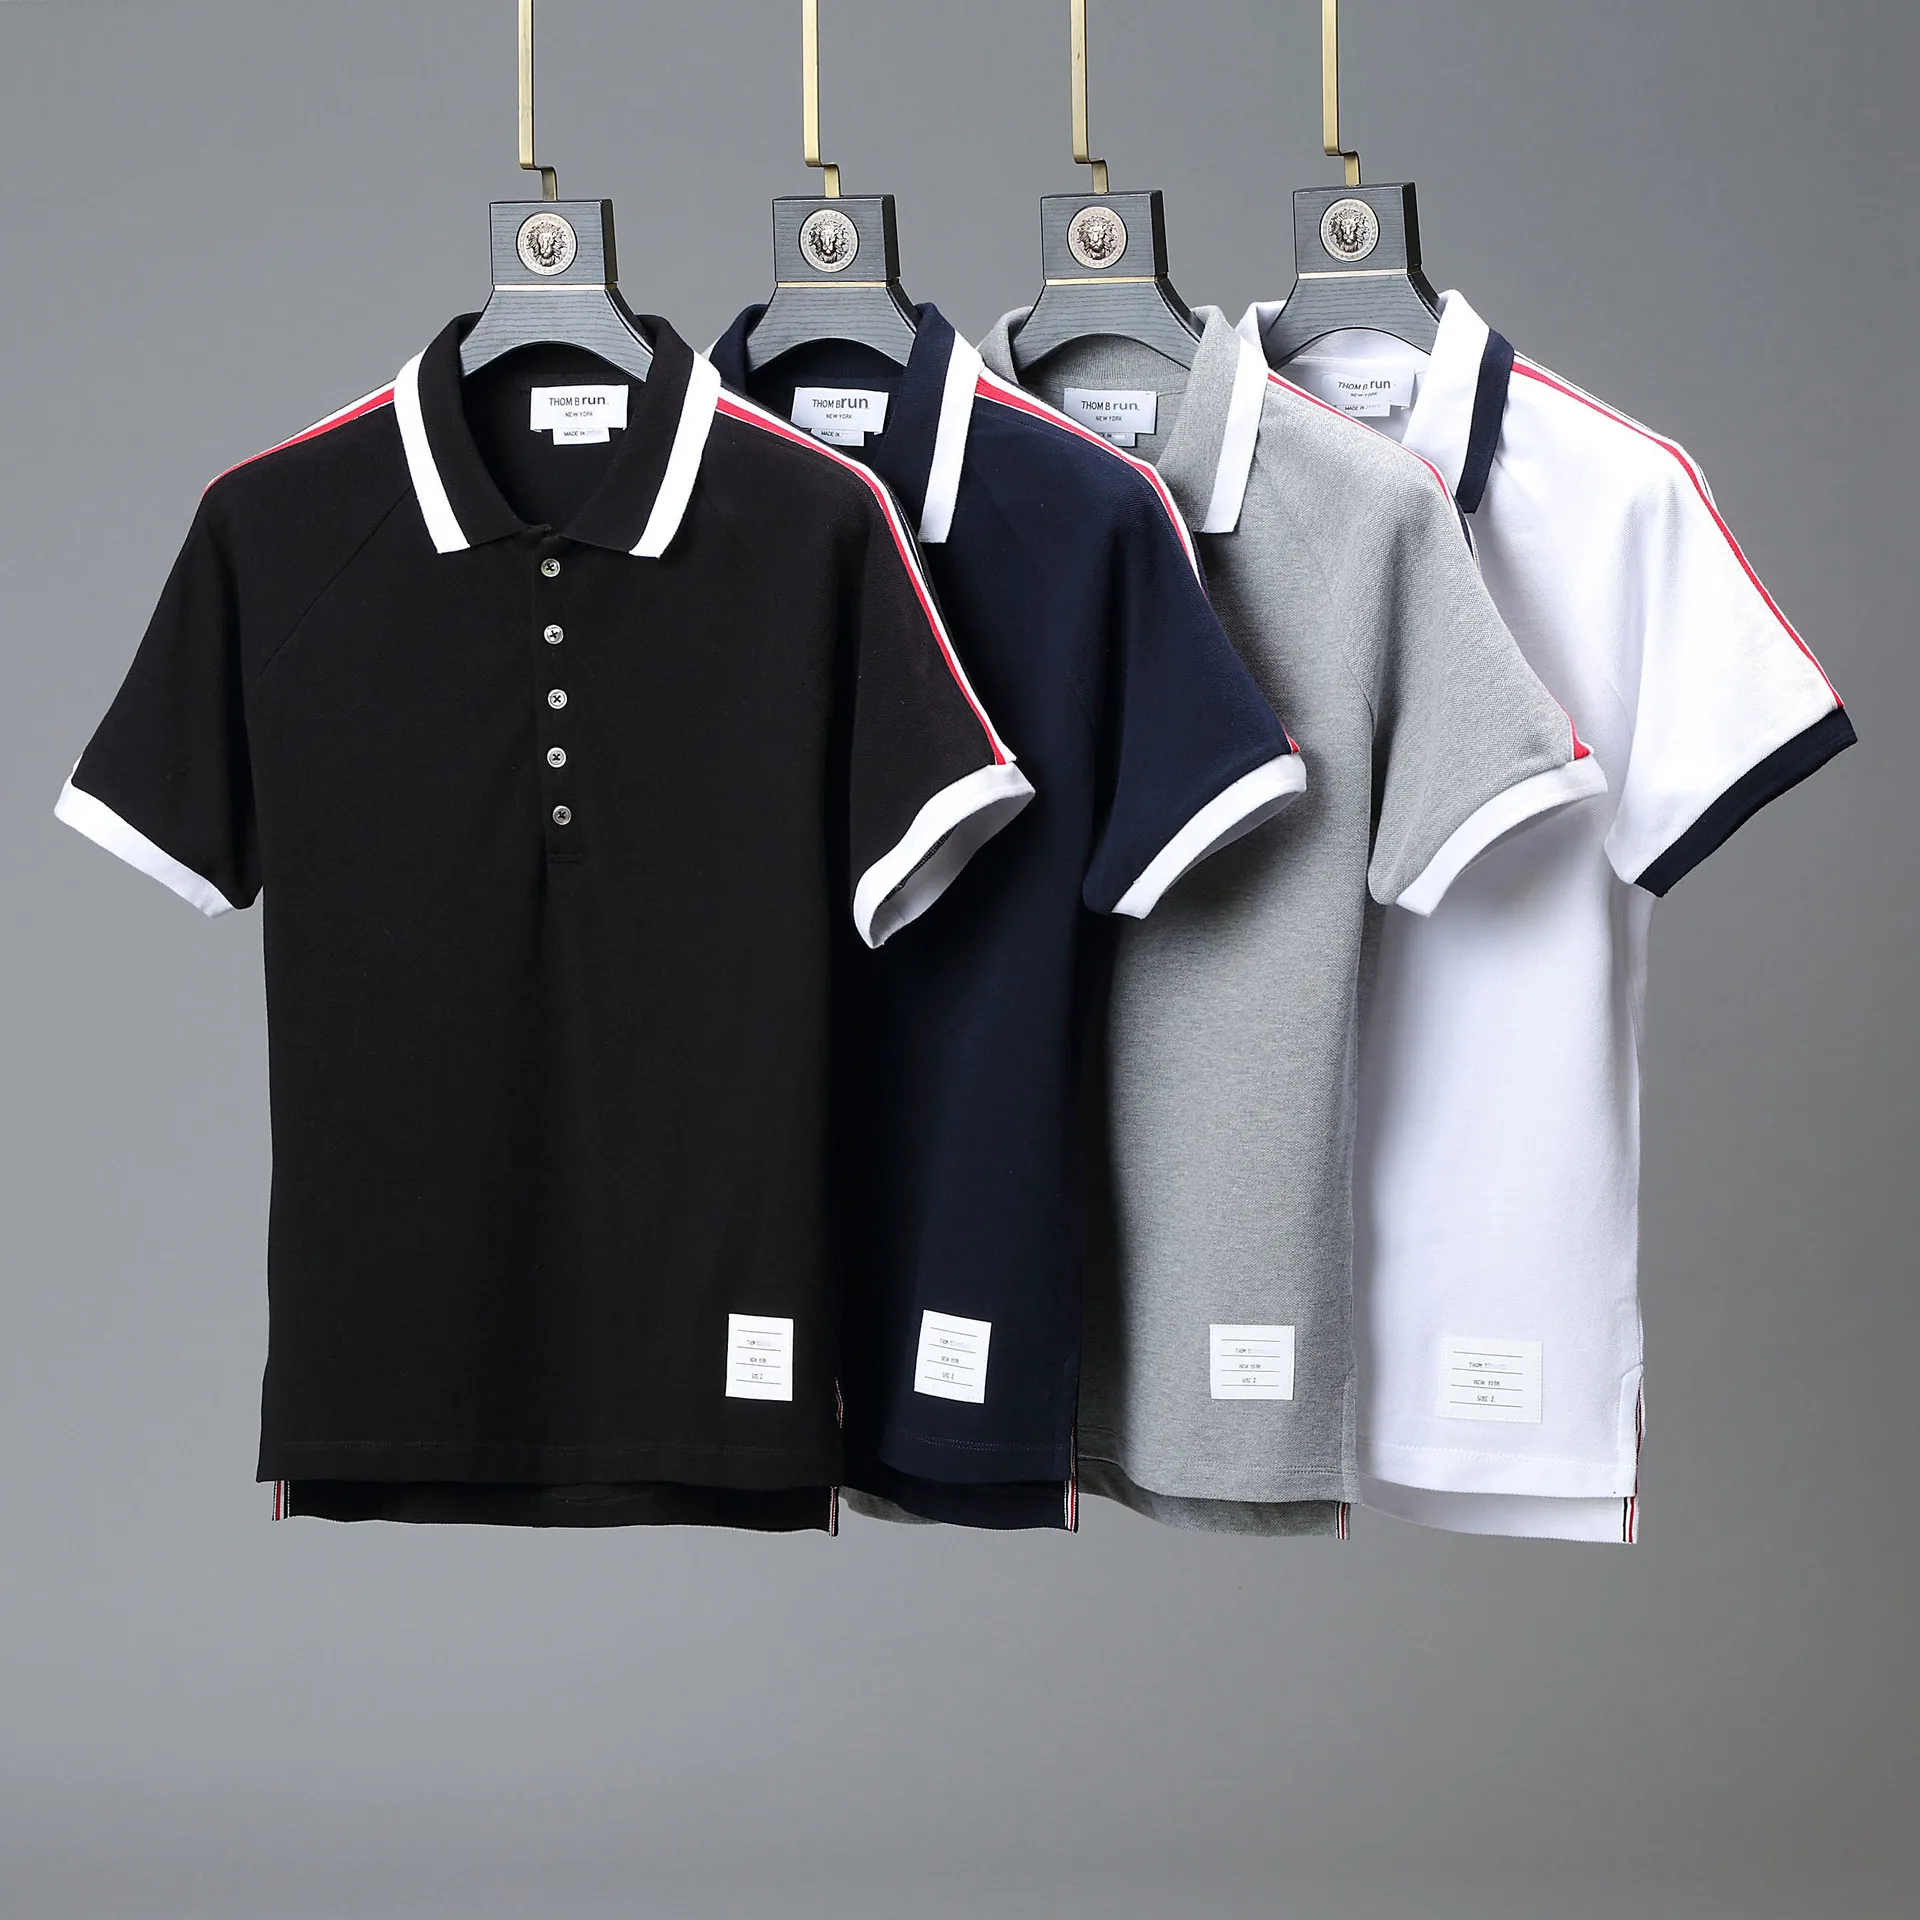 THOM BRUN's new TB summer Short-sleeved lapel polo shirt with white sleeves for men and women